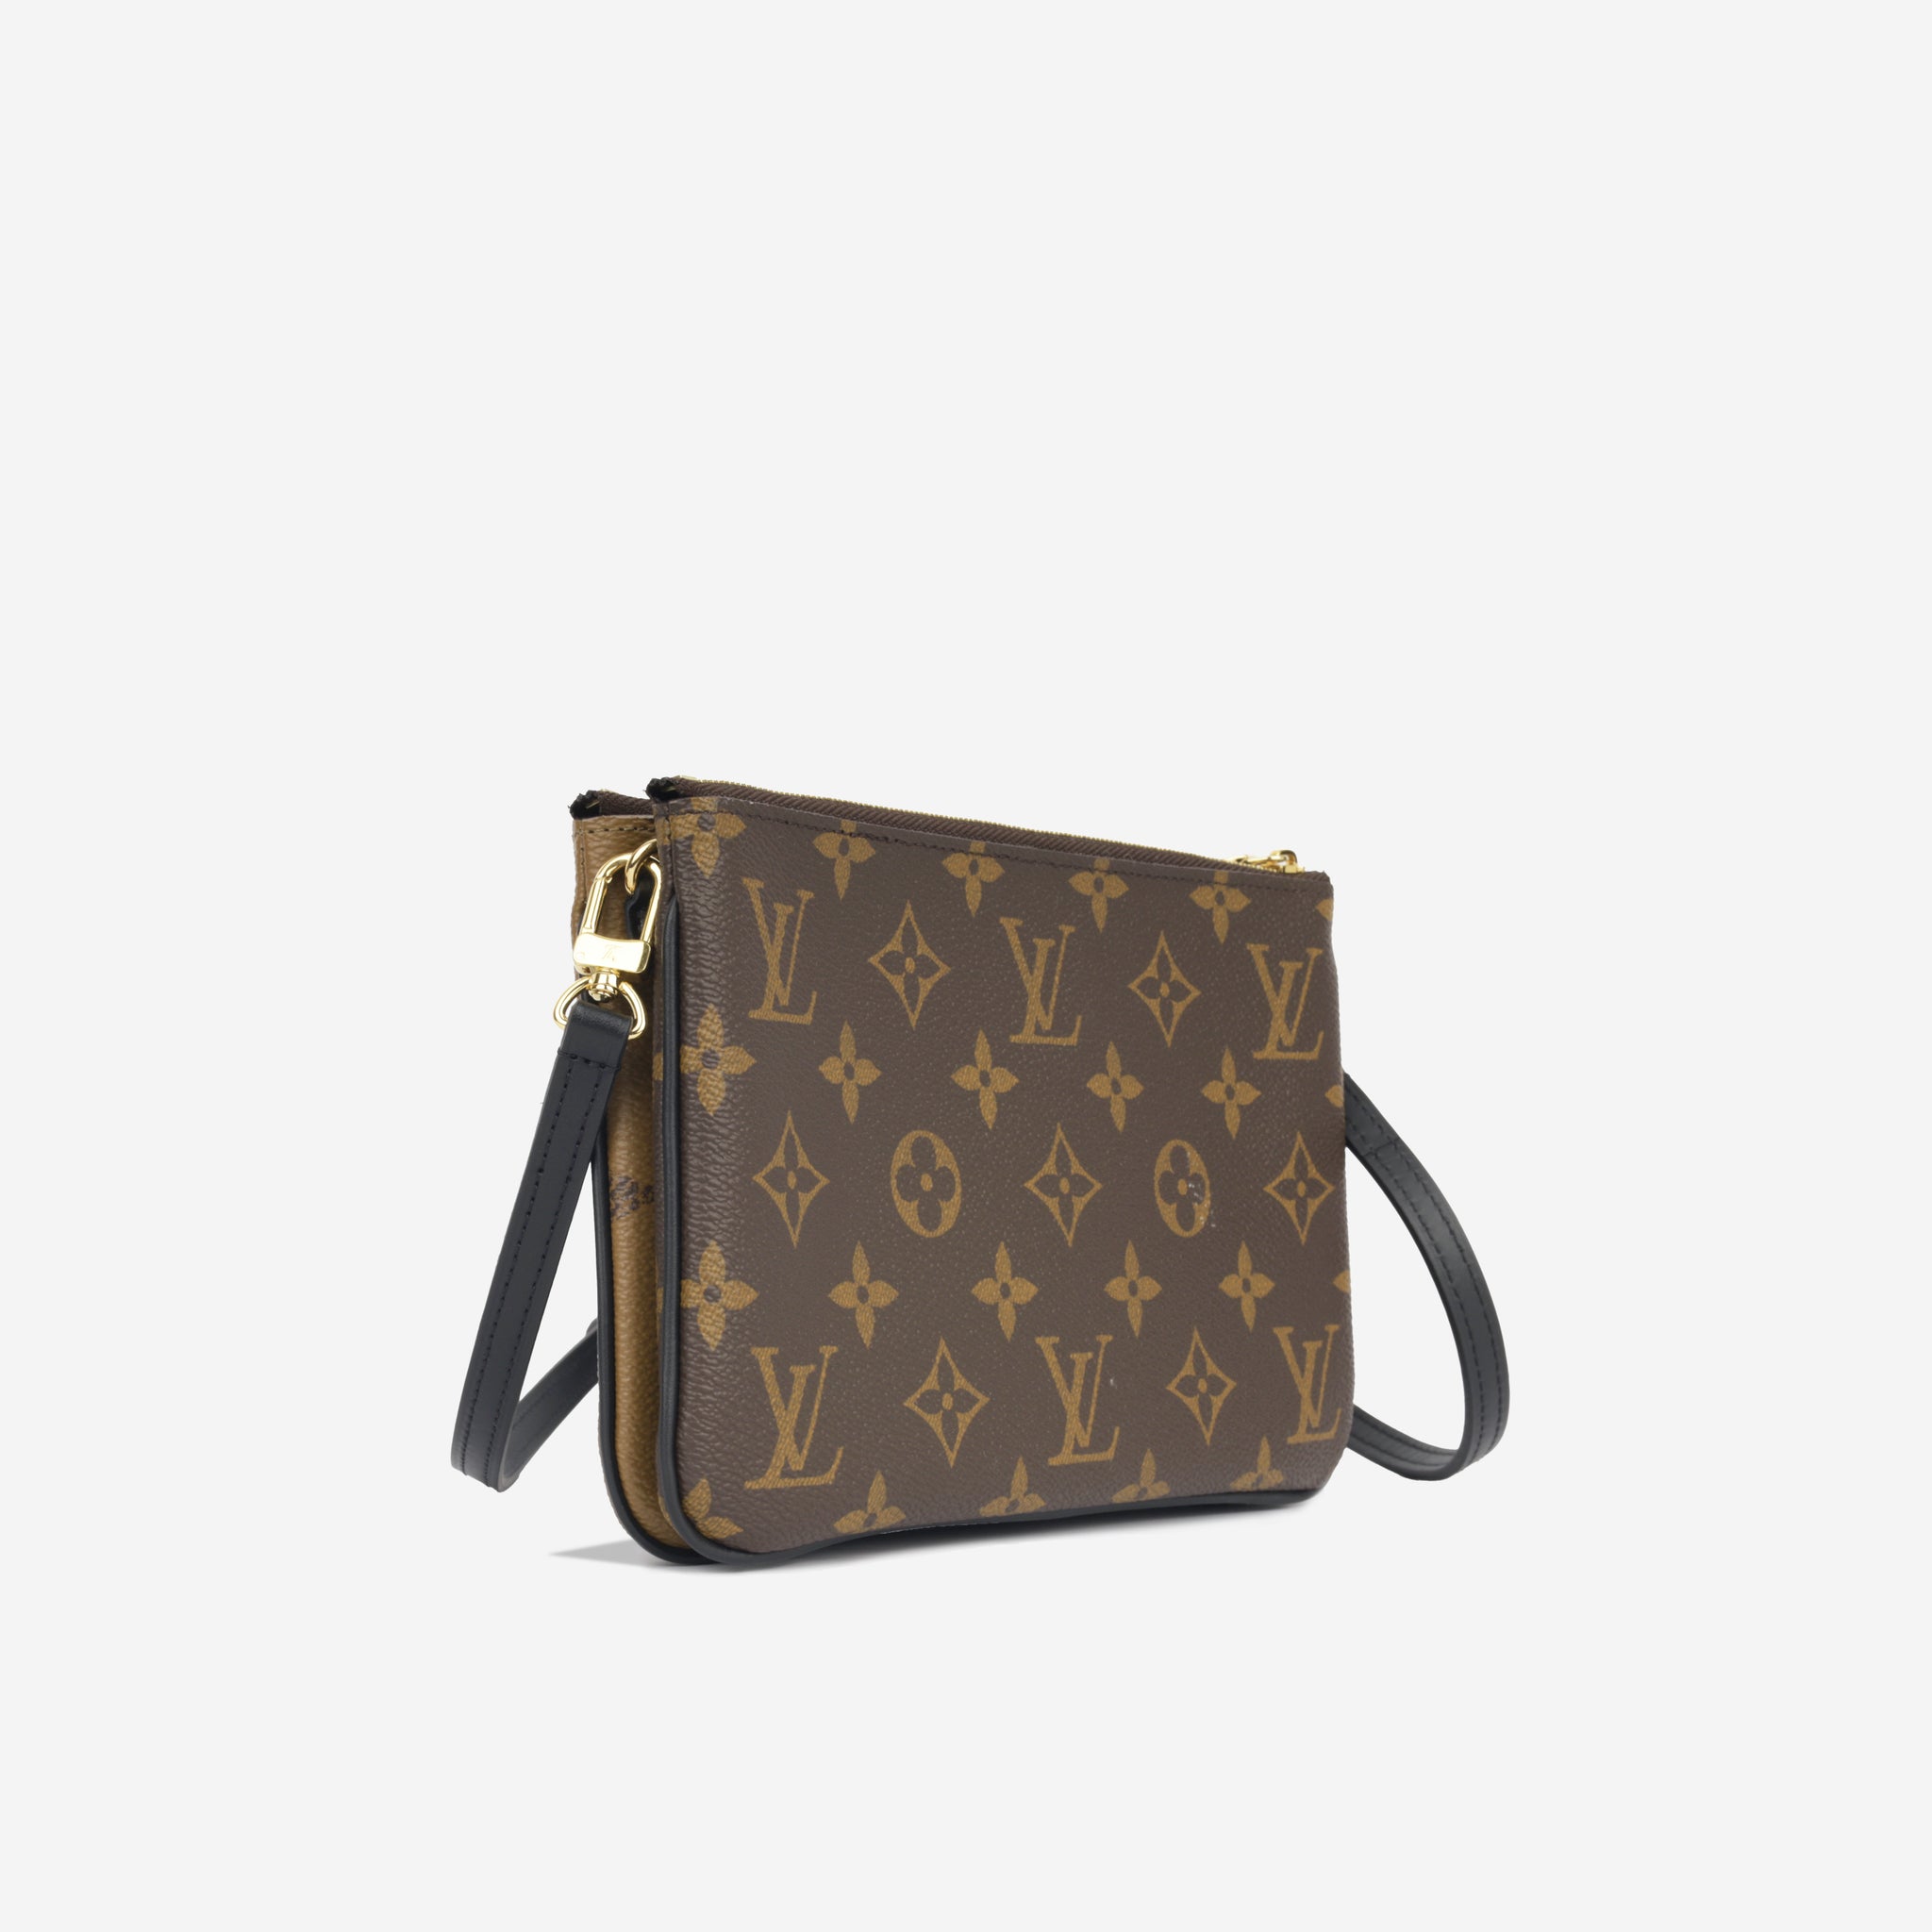 Louis Vuitton - Pochette Double Zip on Strap - Reverse monogram - GHW -  Immaculate condition